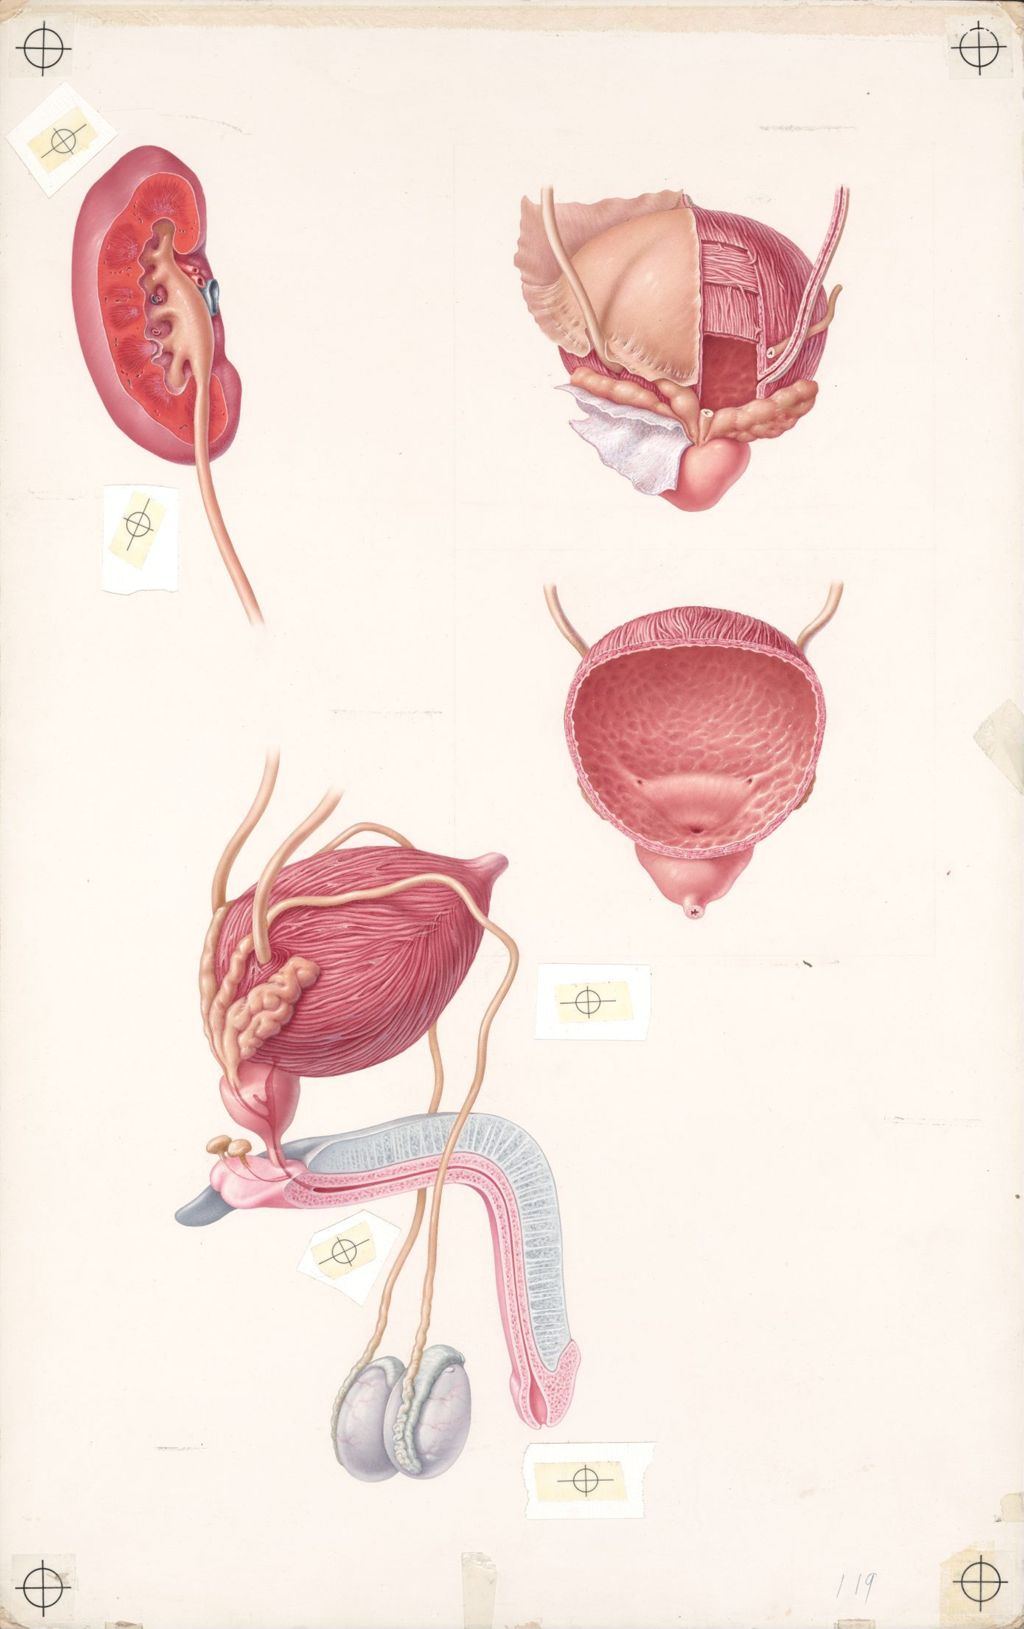 Miniature of Doctor-Patient Explanatory Atlas of Anatomy, The Male Genitourinary System, Plate I, The Male Genitourinary Tract